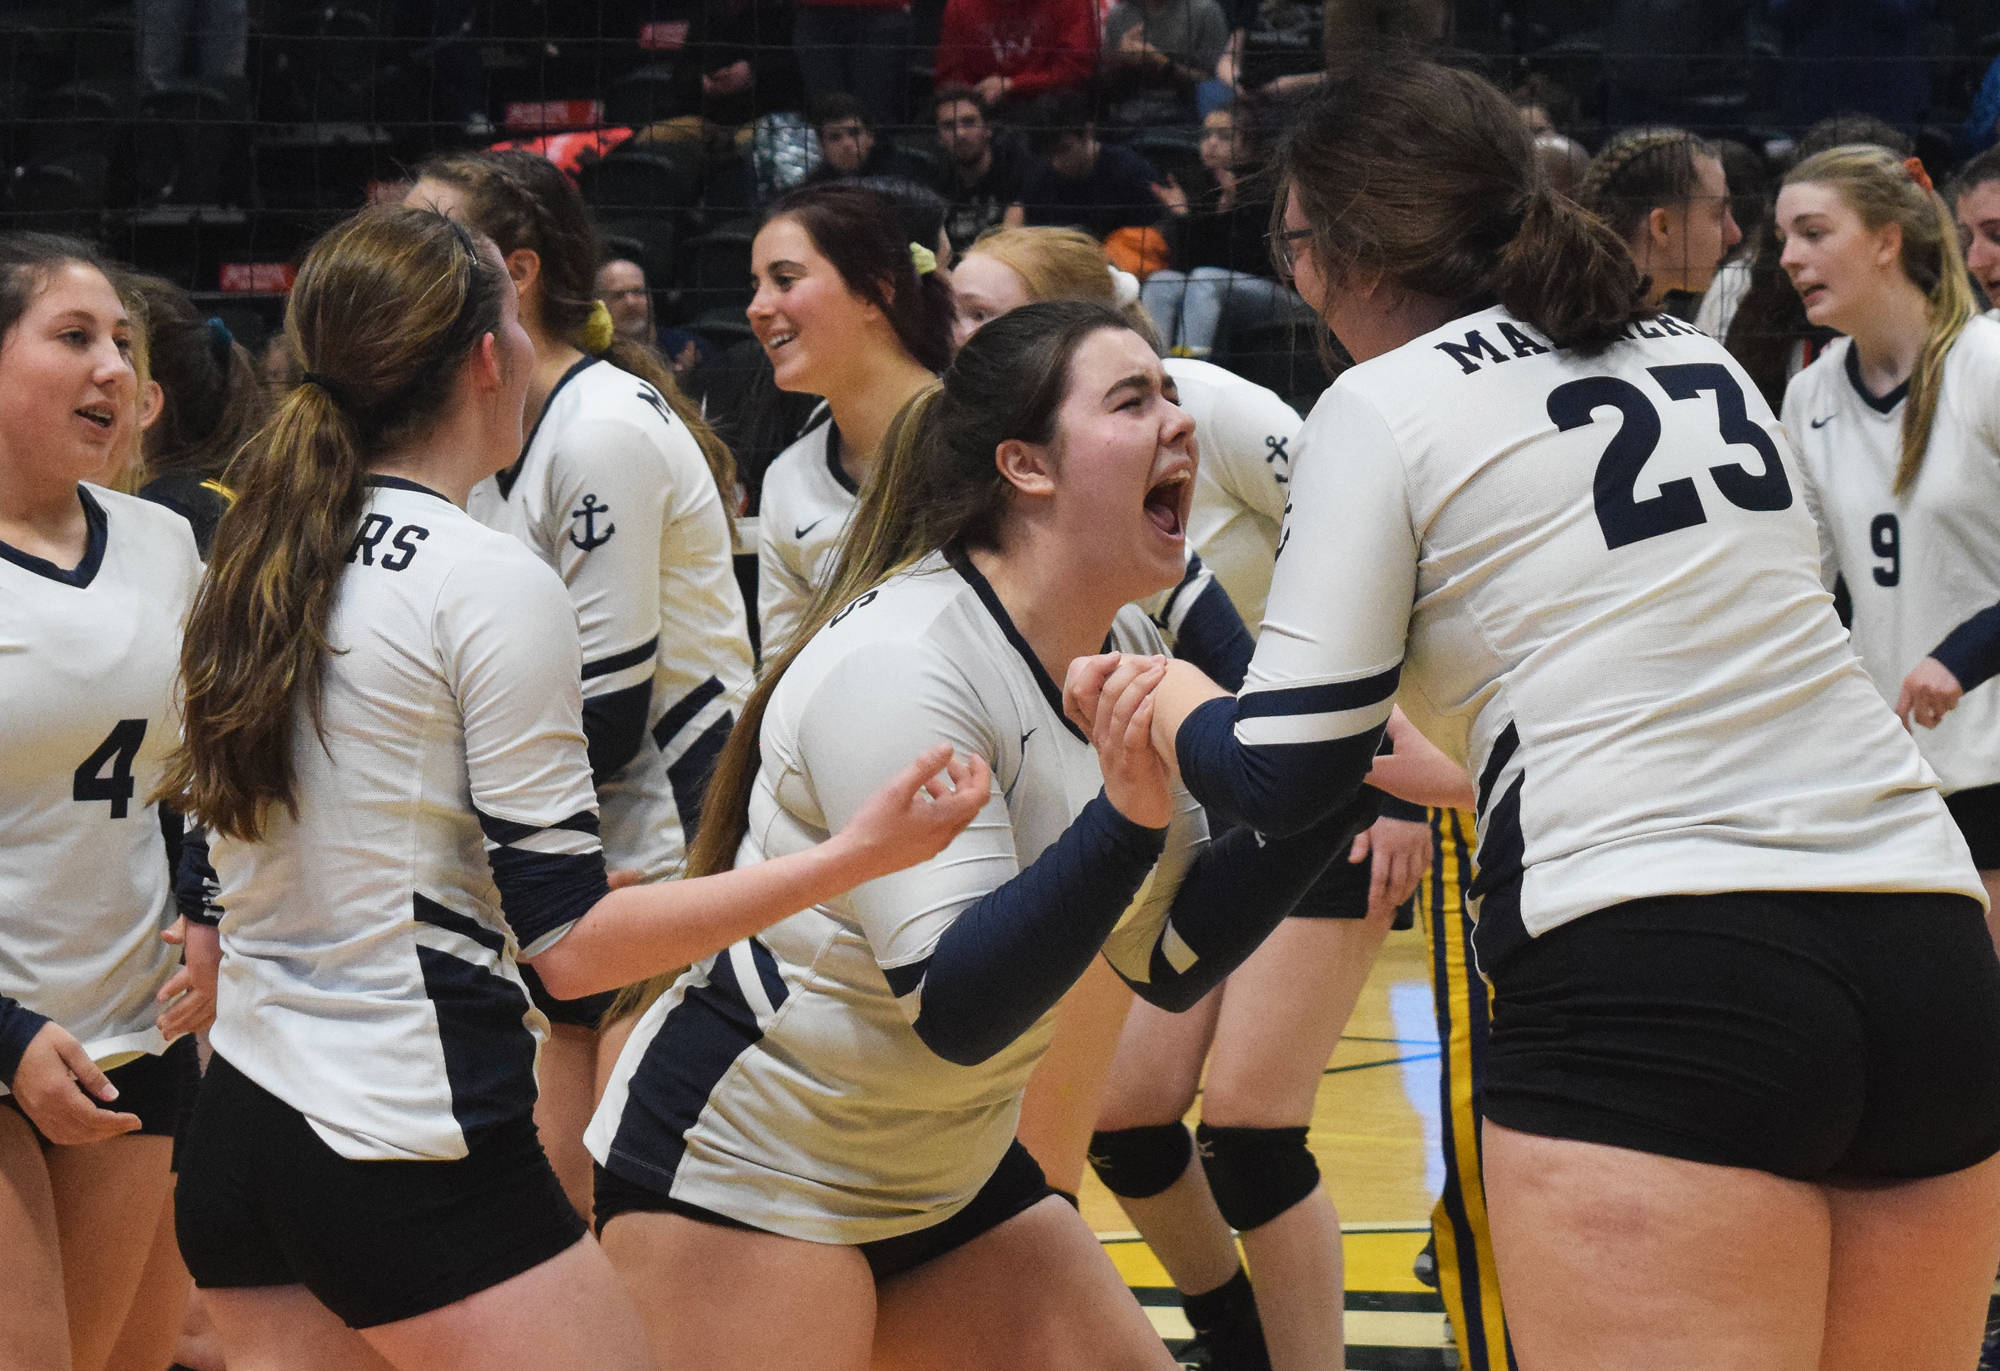 Homer teammate Katlyn Vogl (left) and Tonda Smude celebrate Saturday, Nov. 16, 2019, after winning the Class 3A state volleyball tournament at the Alaska Airlines Center in Anchorage, Alaska. (Photo by Joey Klecka/Peninsula Clarion)